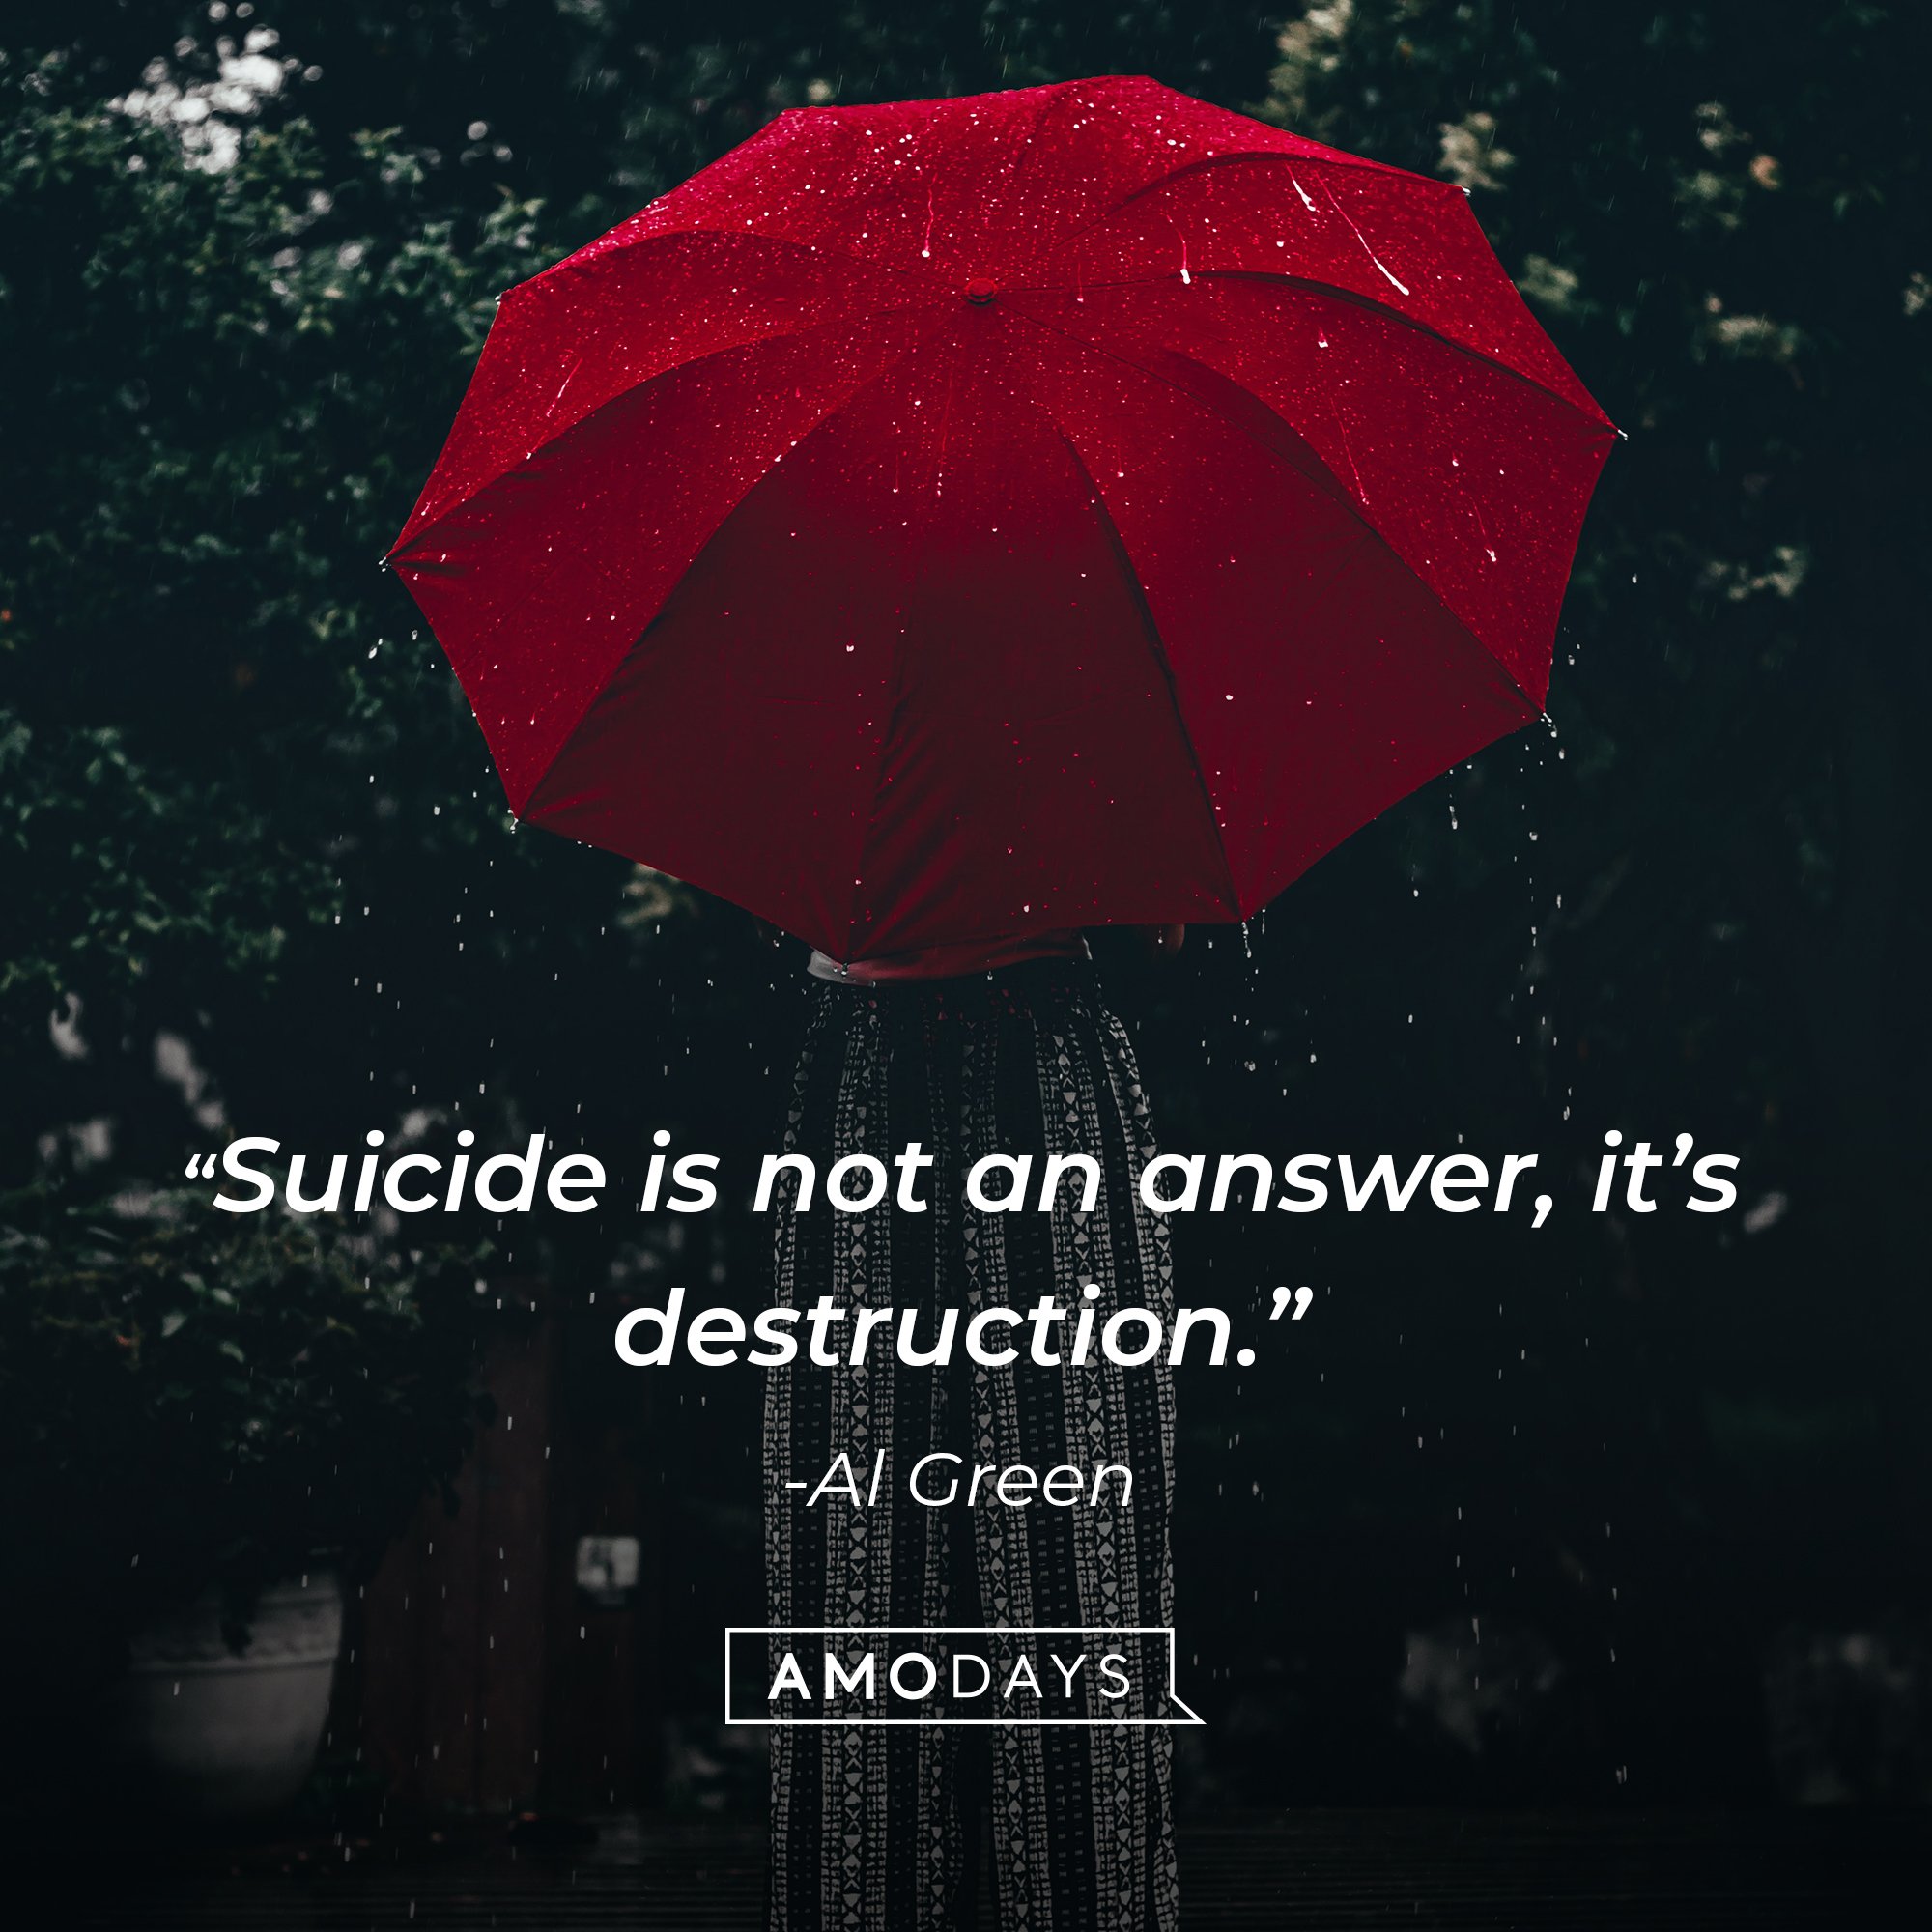 Al Green's quote: “Suicide is not an answer, it’s destruction.” | Image: AmoDyas